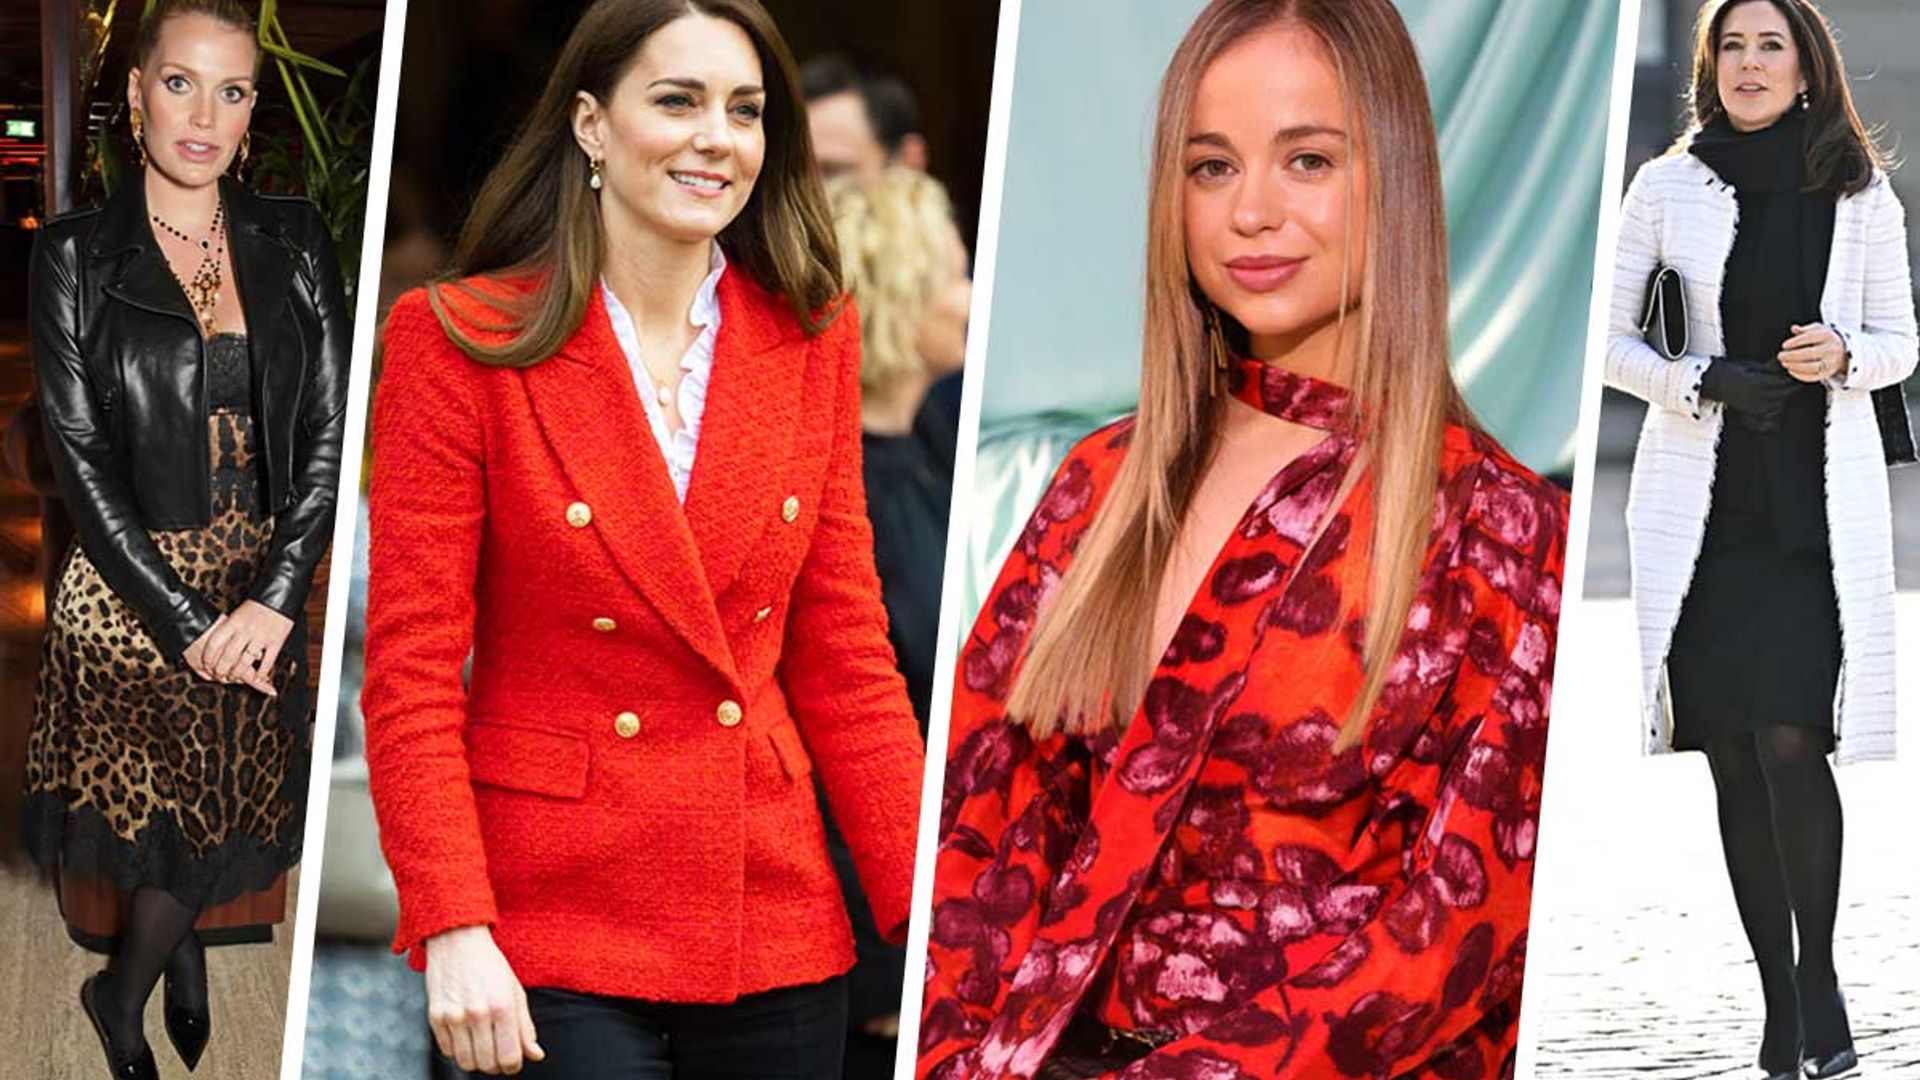 Kate Middleton continues her corporate looks in a red Zara blazer and  trousers